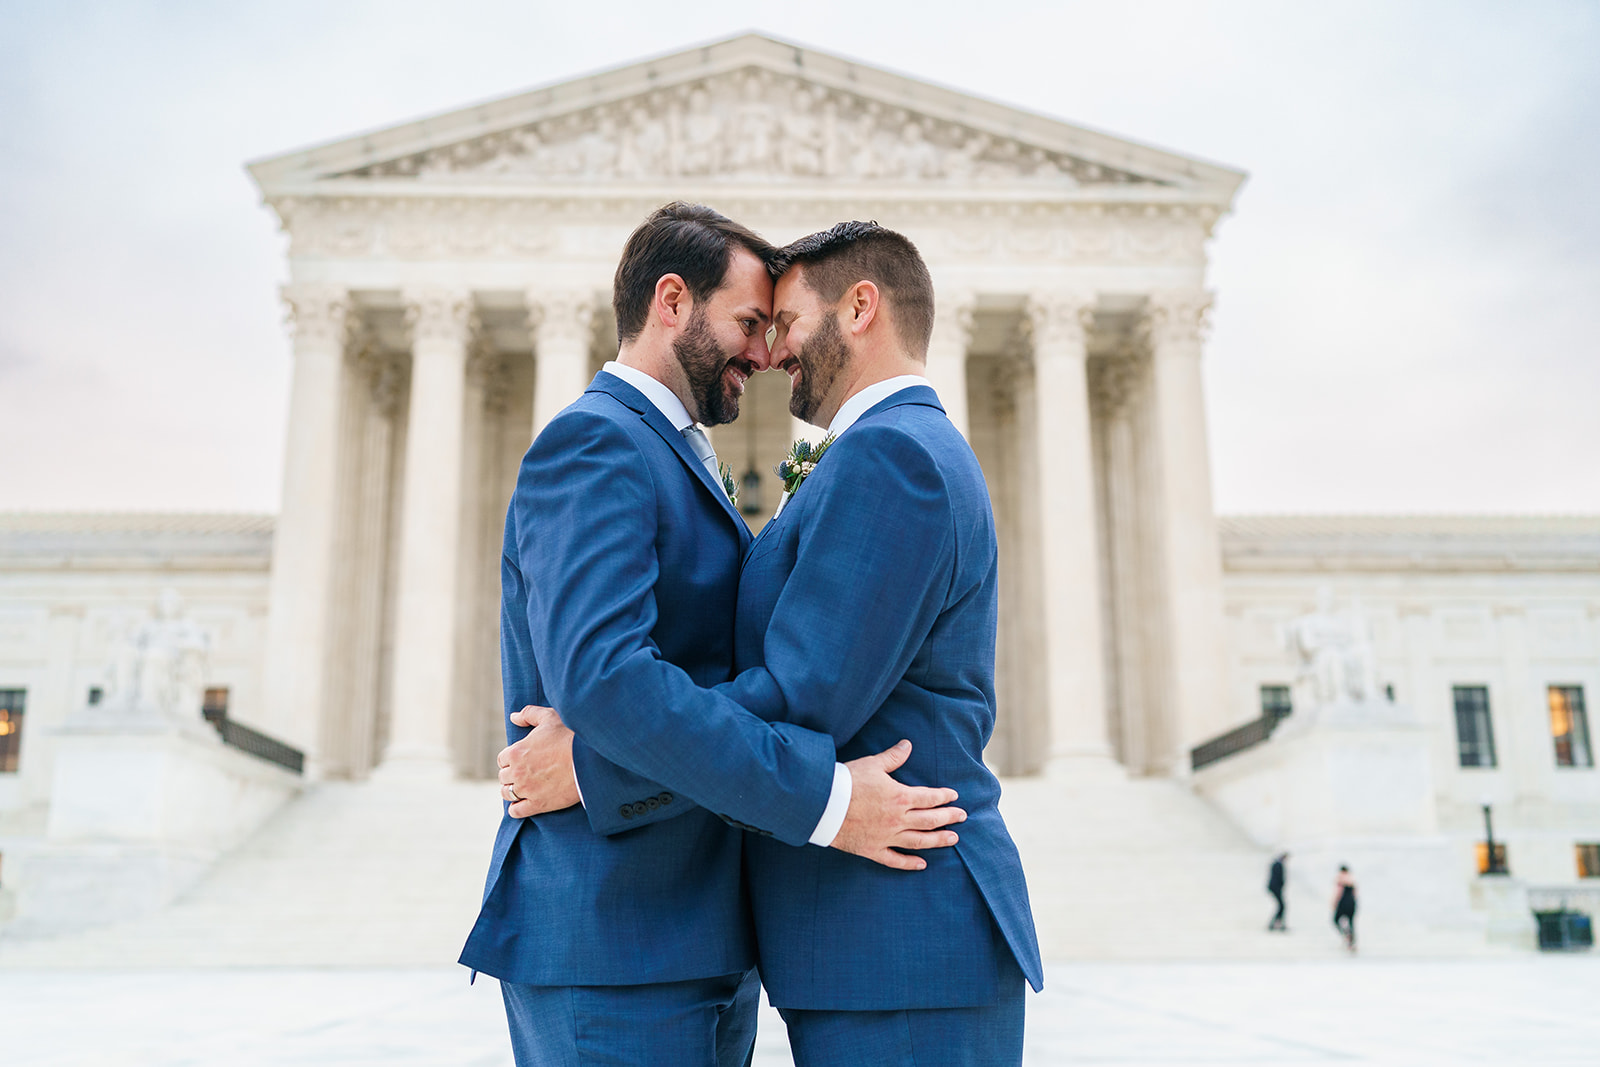 Couple embraces in front of Supreme Court